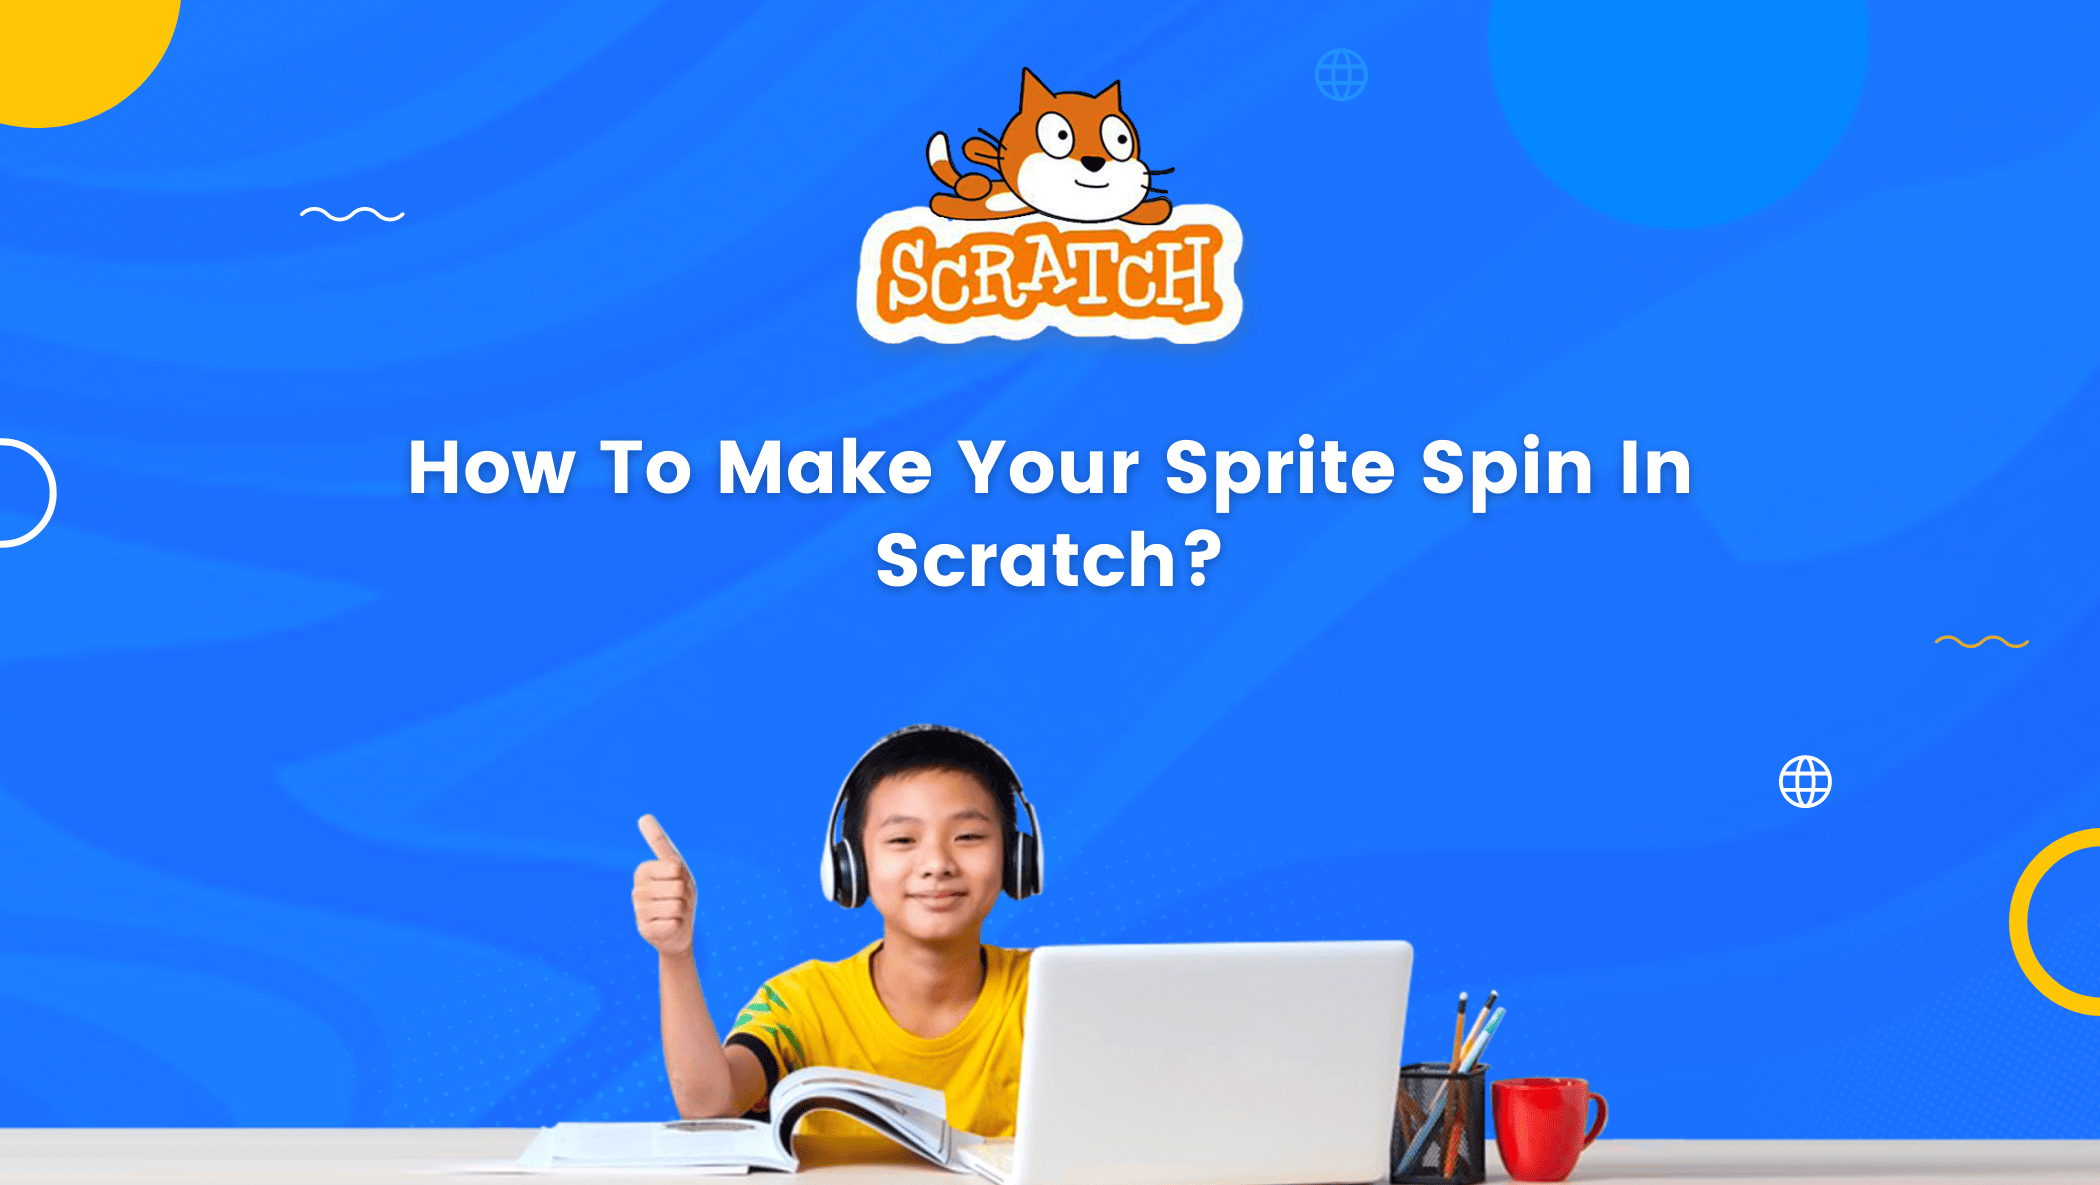 How To Make Your Sprite Spin